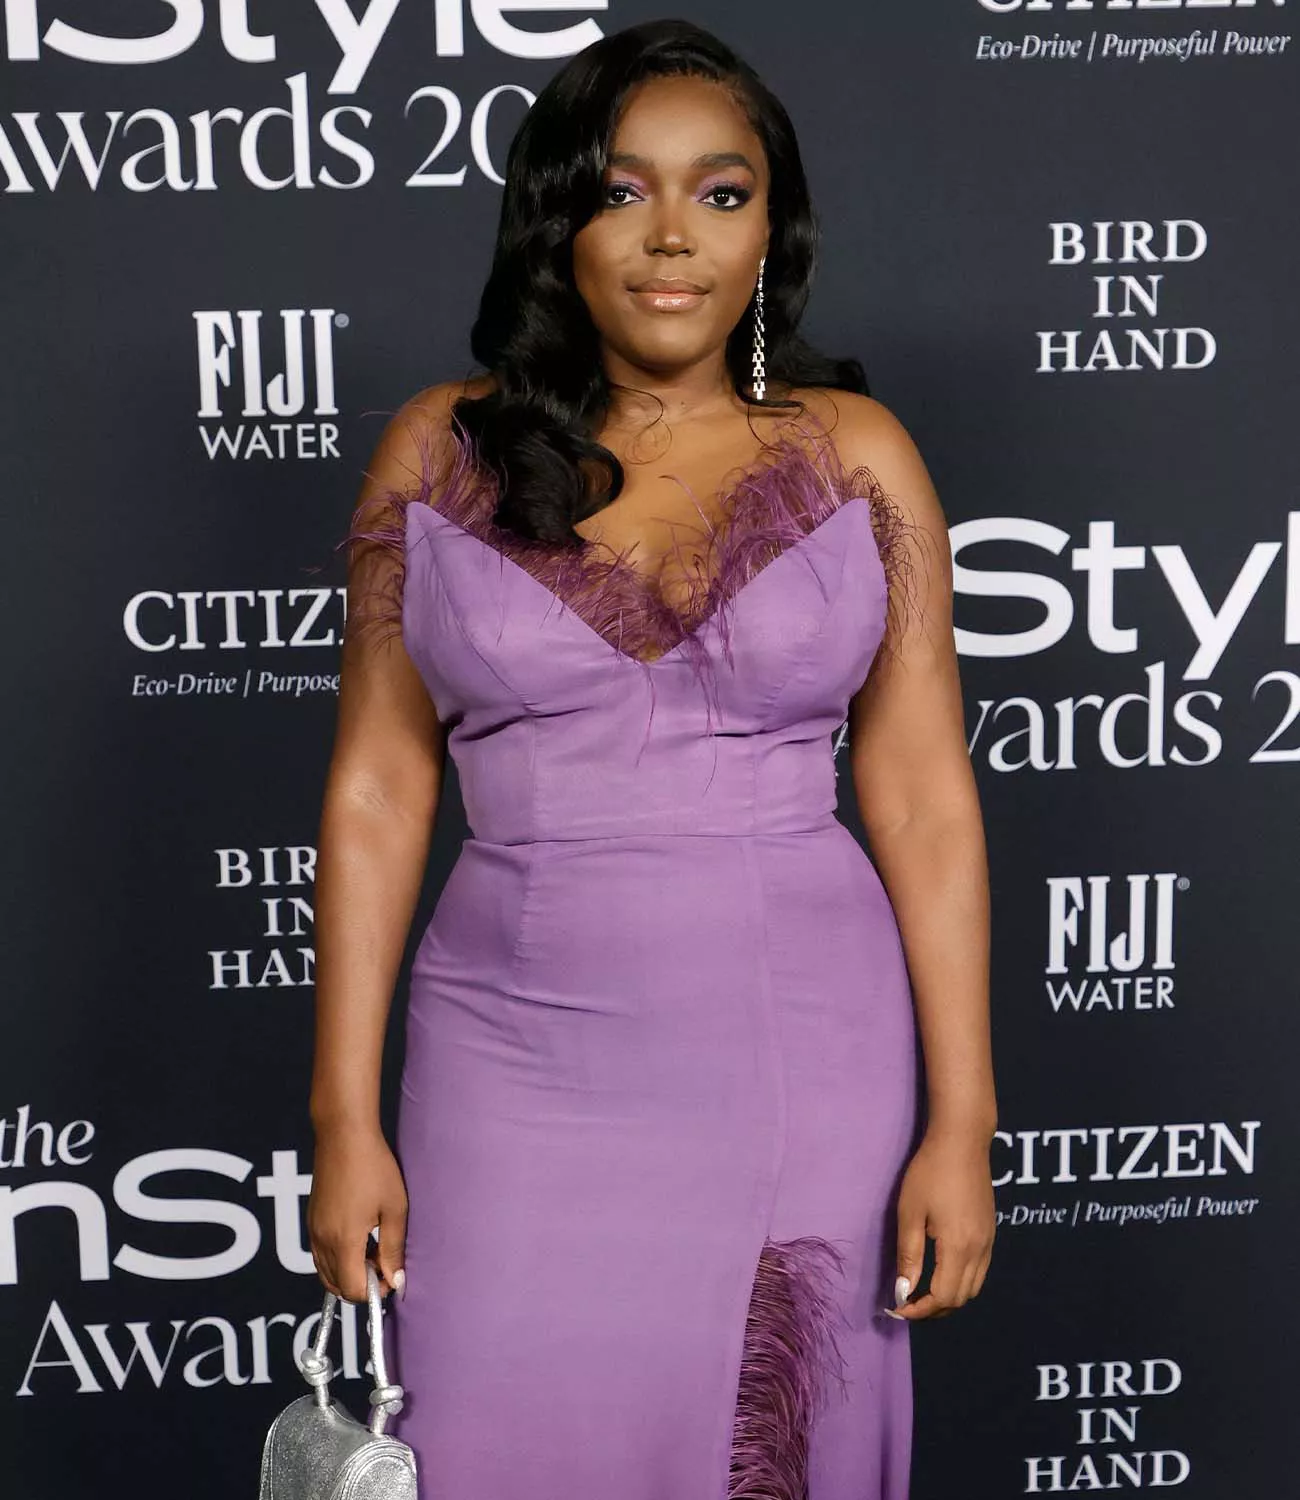 Anifa Mvuemba attends the 6th Annual InStyle Awards in 2021.